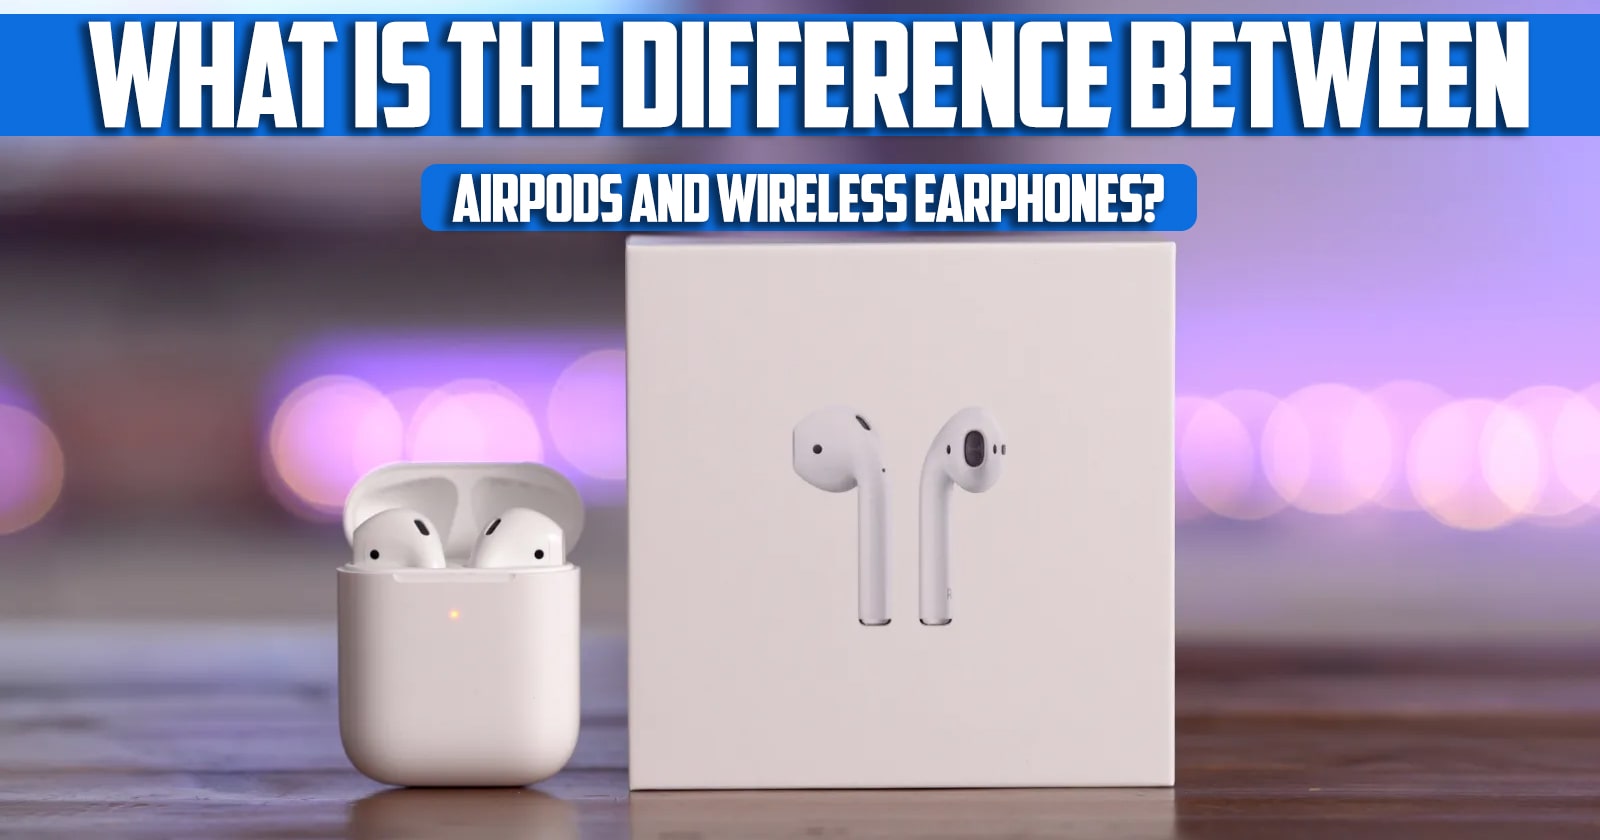 What is the difference between AirPods and wireless earphones?